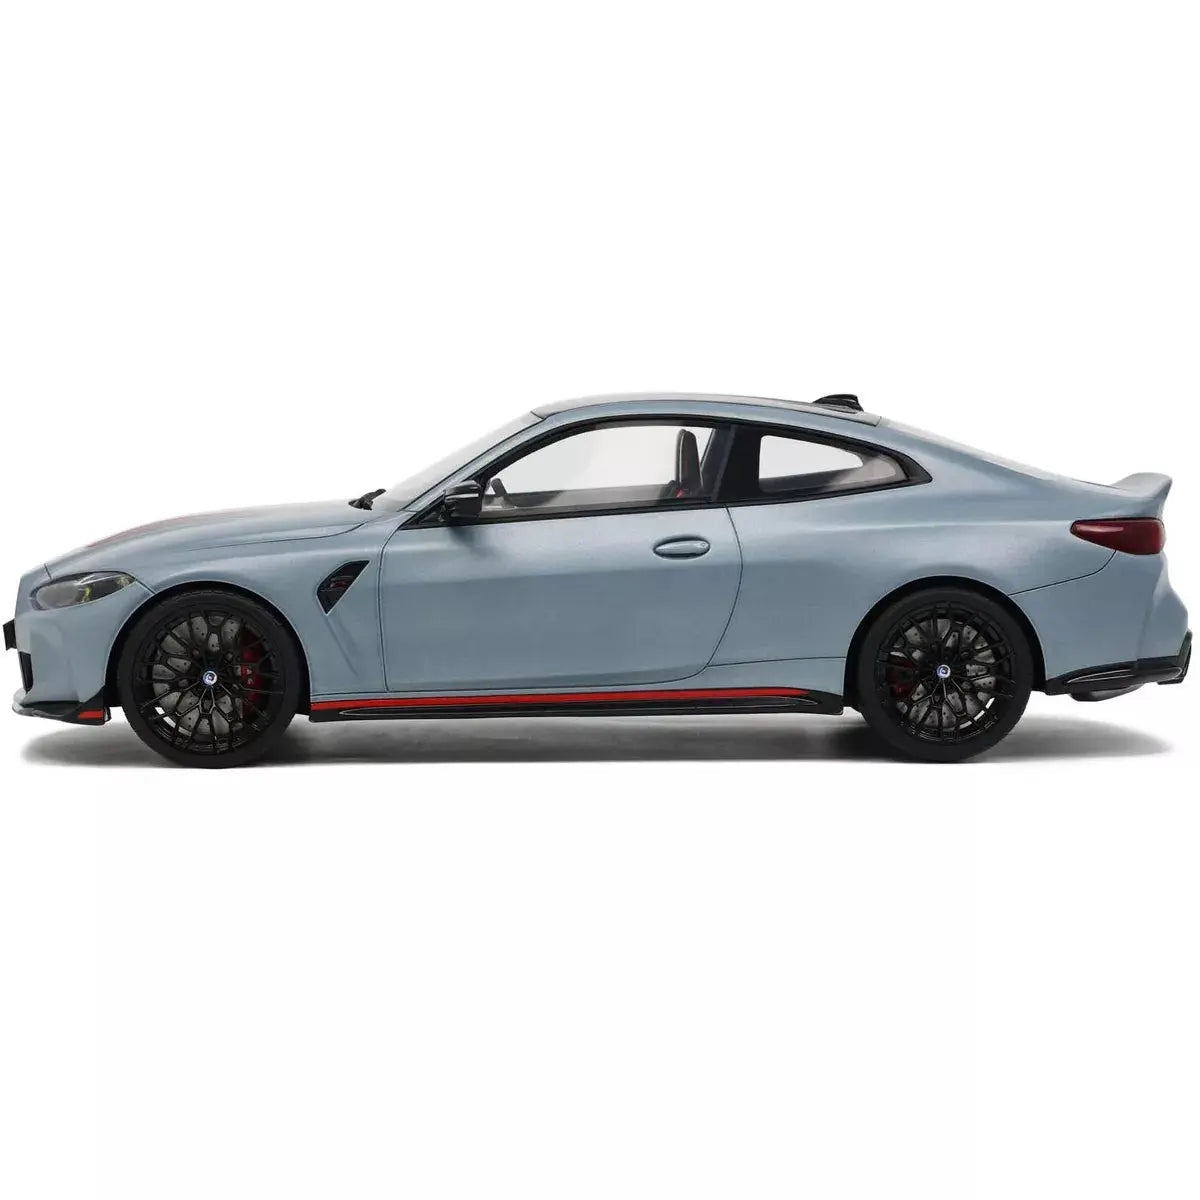 2022 BMW M4 CSL Gray Metallic with Black and Red Stripes and Black Top 1/18 Scale - Perfect Diecast